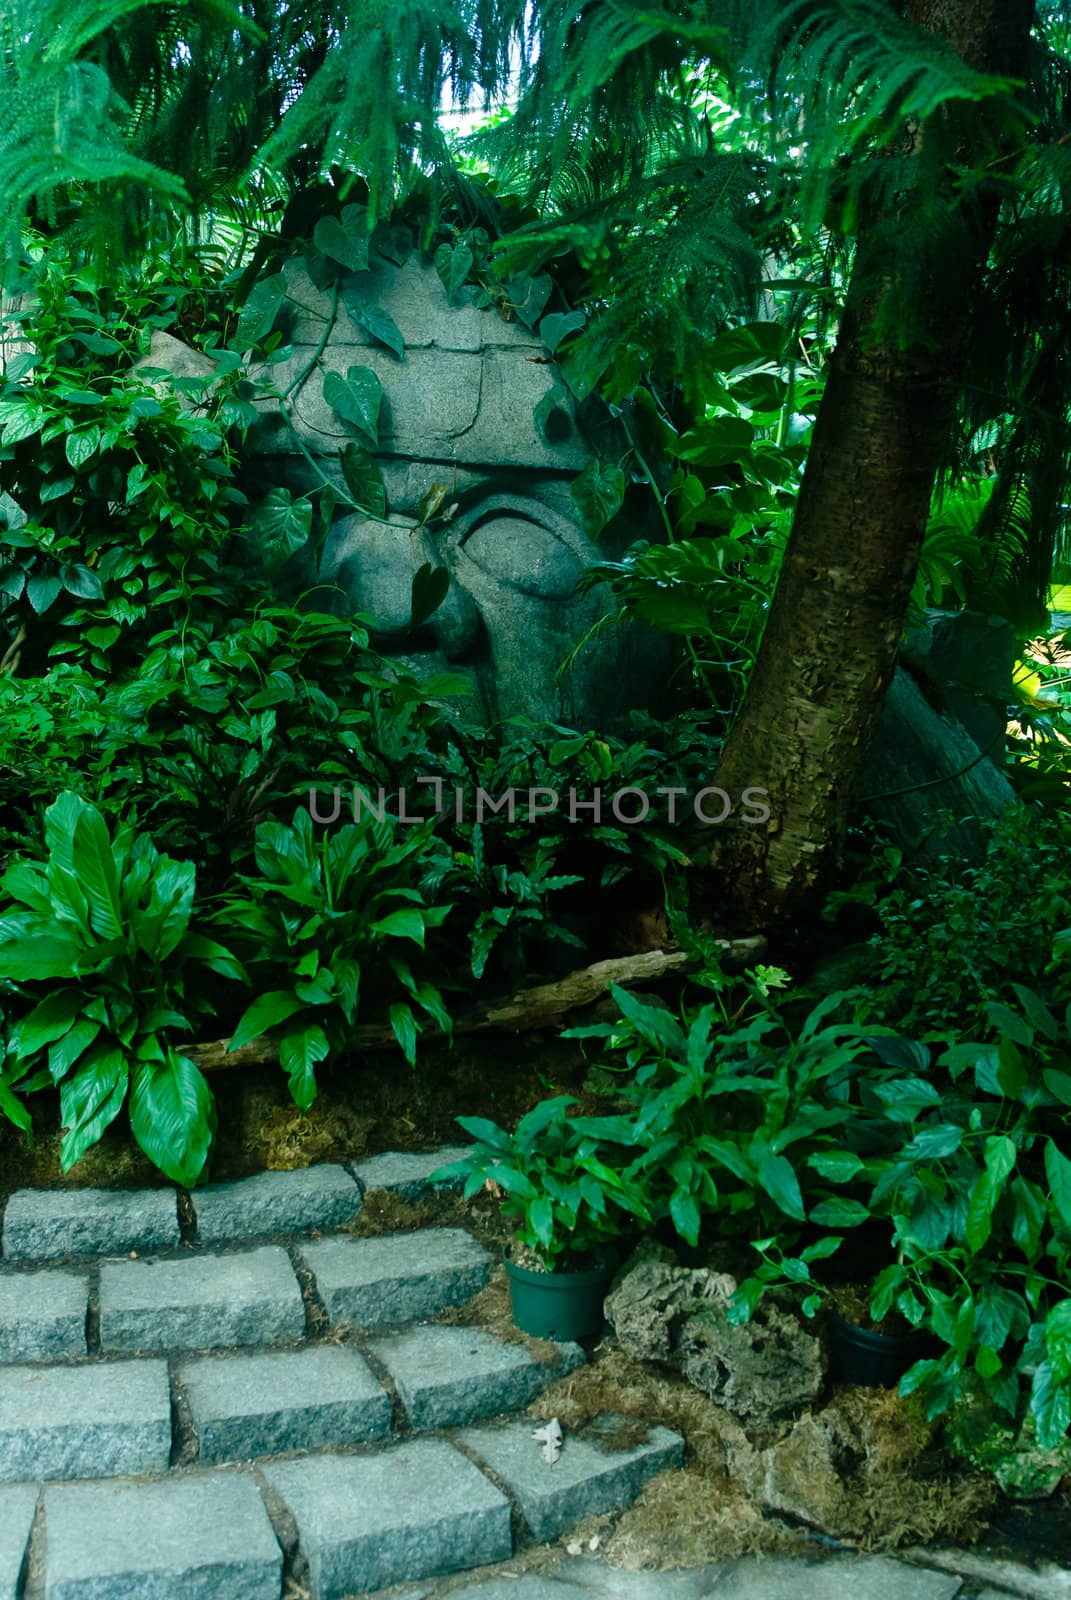 An old giant stone head hiding in a forest of ruins.